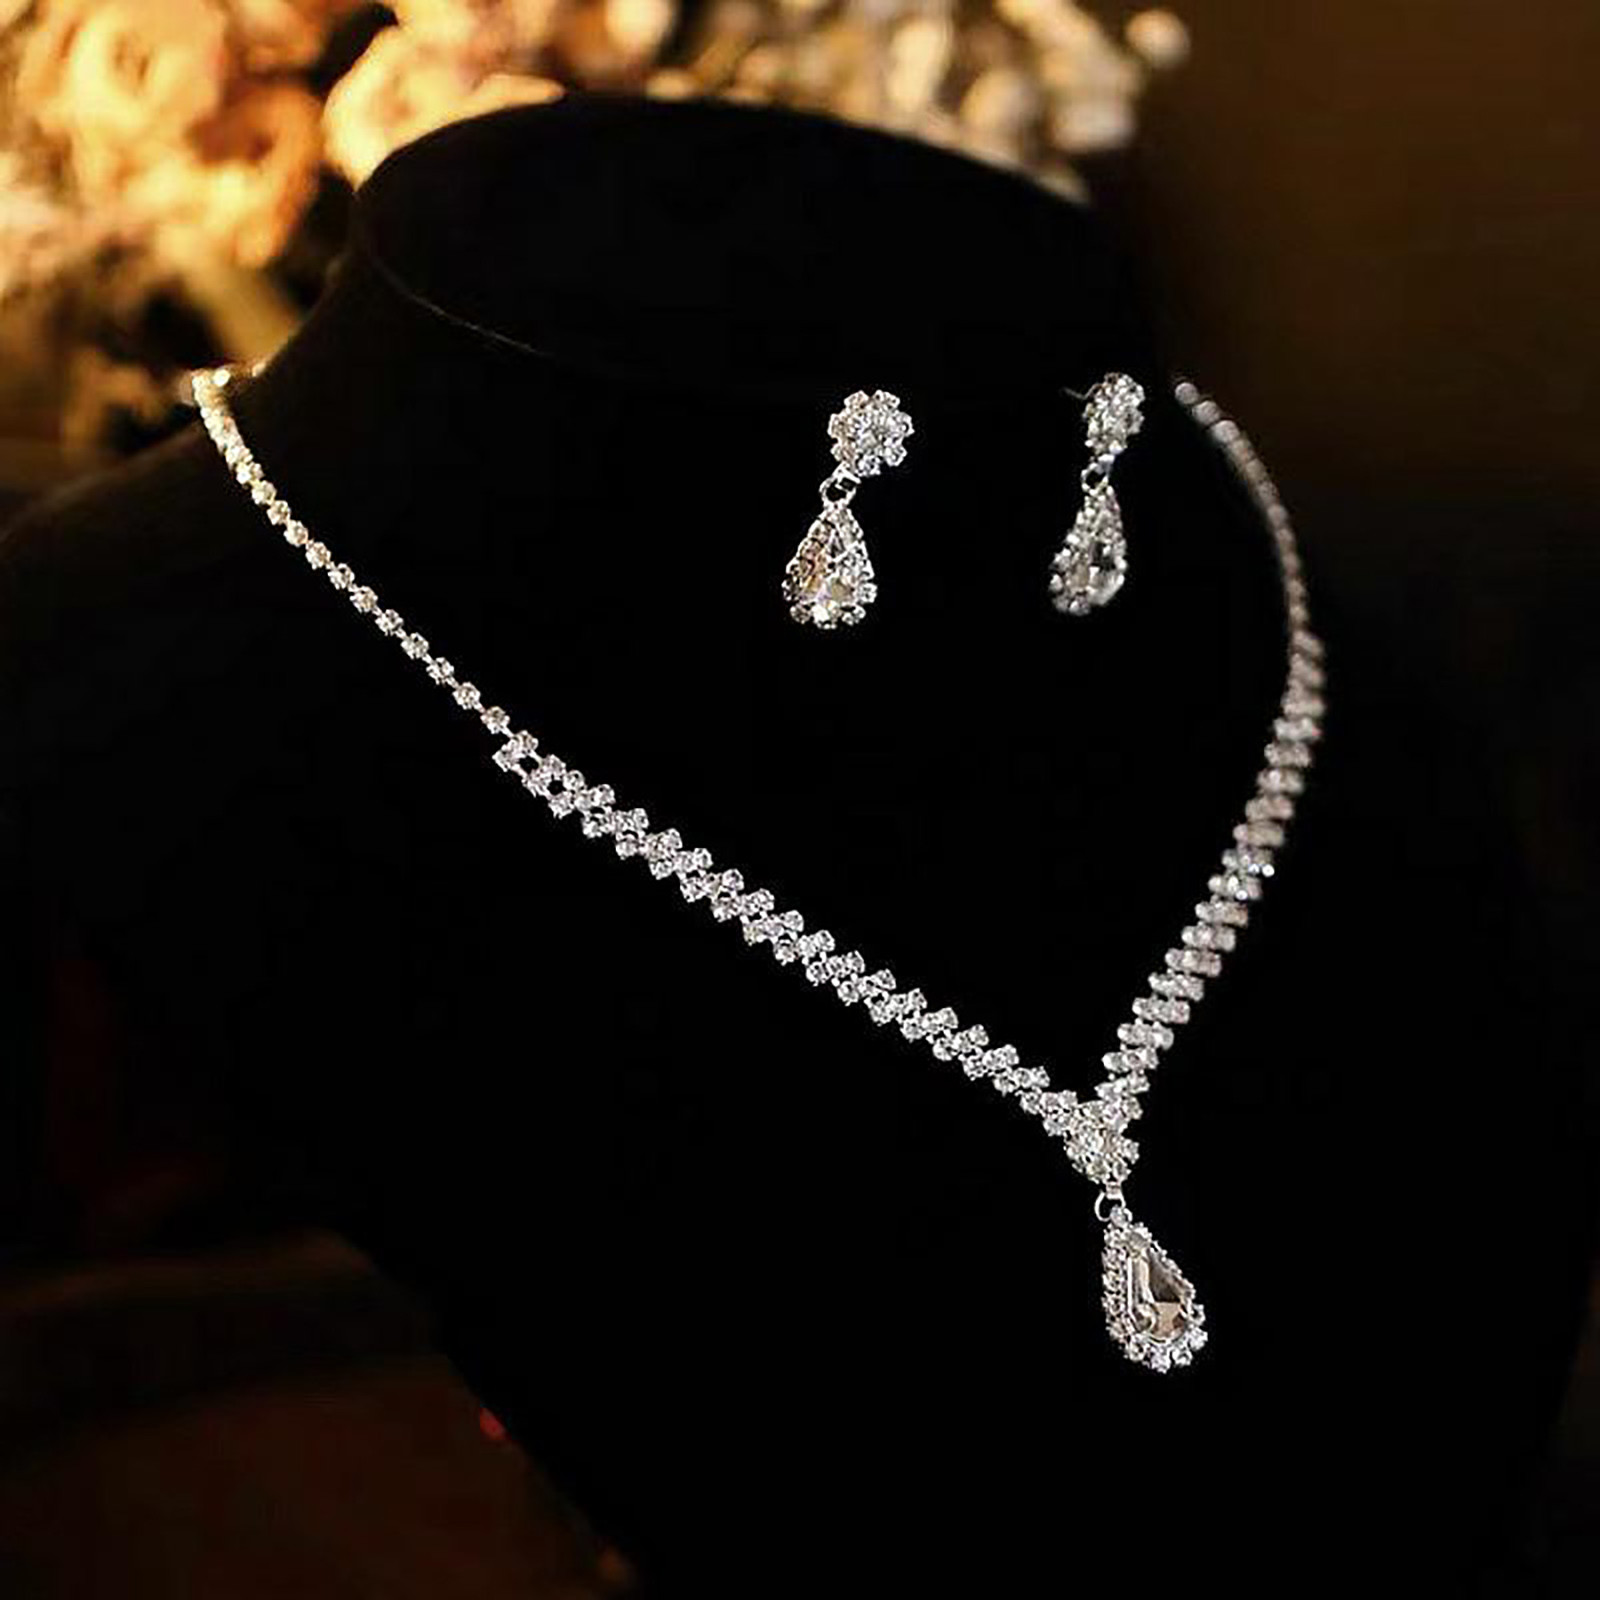 TIHLMK Deals Clearance Initial Necklaces for Women Exquisite Rhinestone Chain Necklace Set Diamond Necklace and Earrings Two-piece Wedding Bridal Jewelry Set - image 5 of 5